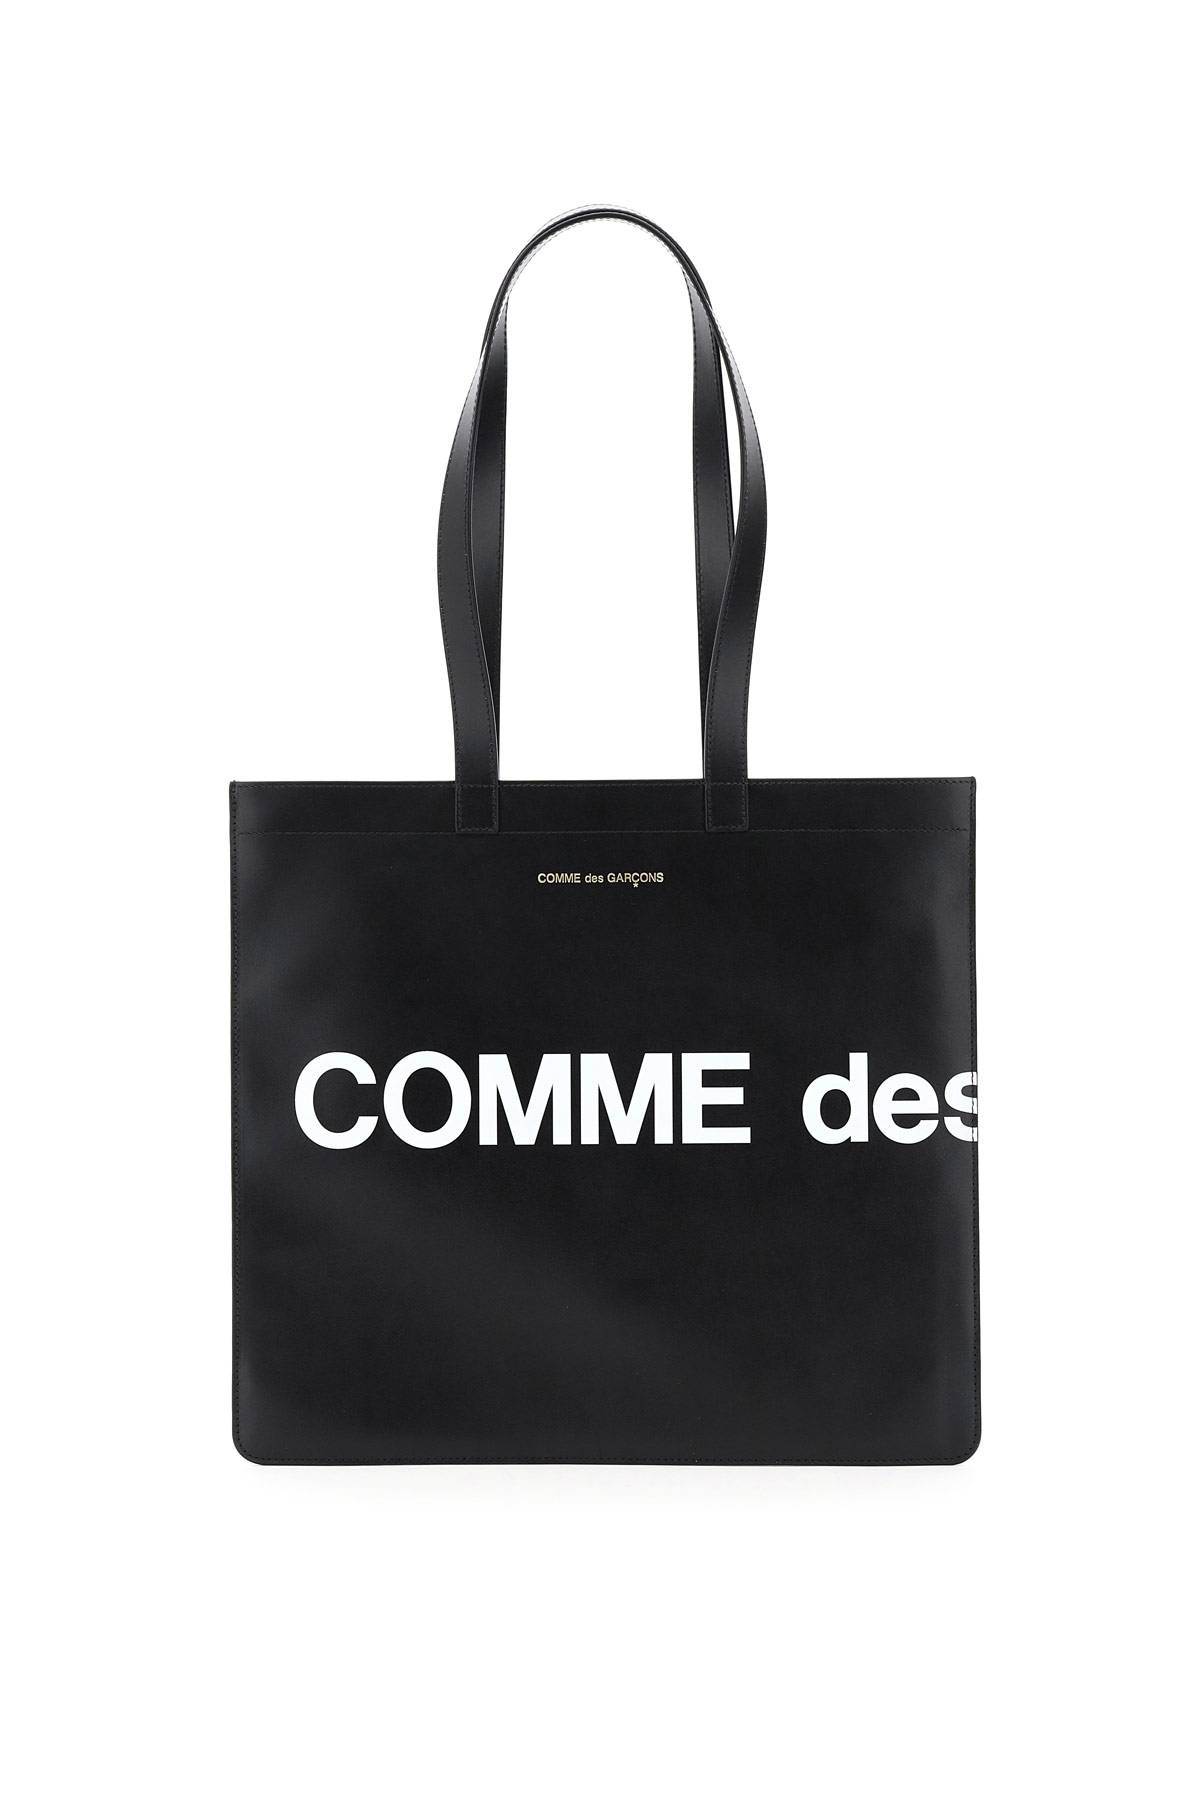 COMME DES GARCONS WALLET COMME DES GARCONS WALLET leather tote bag with logo